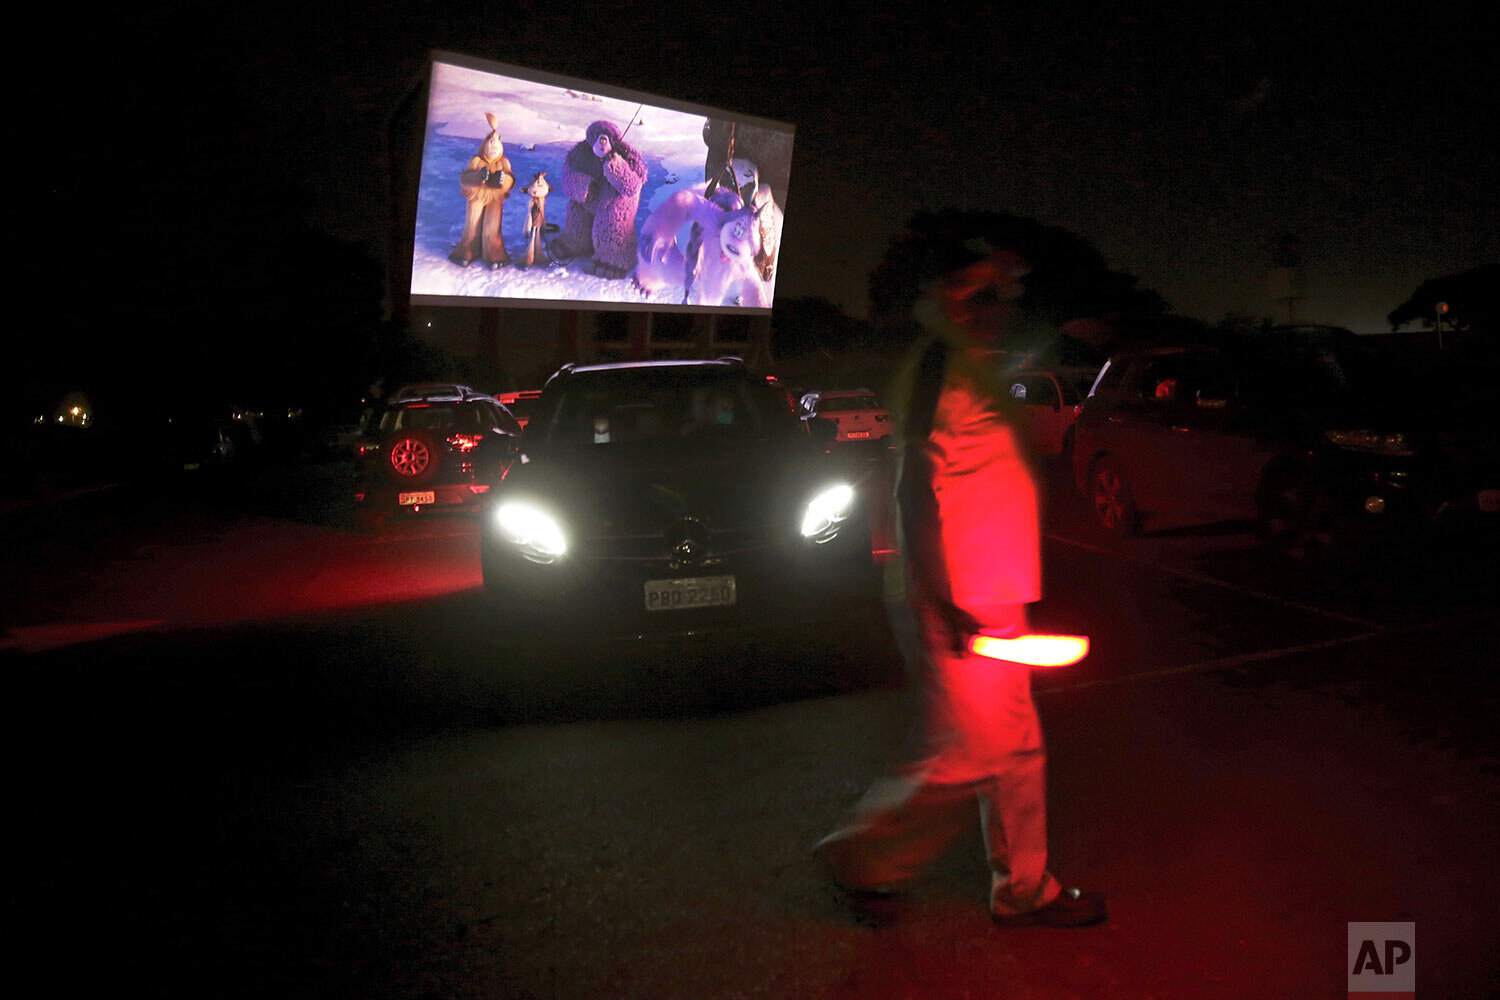  A worker carries a red lantern to signal drivers at the drive-thru movie theater amid the new coronavirus pandemic in Brasilia, Brazil, Wednesday, May 13, 2020. (AP Photo/Eraldo Peres) 